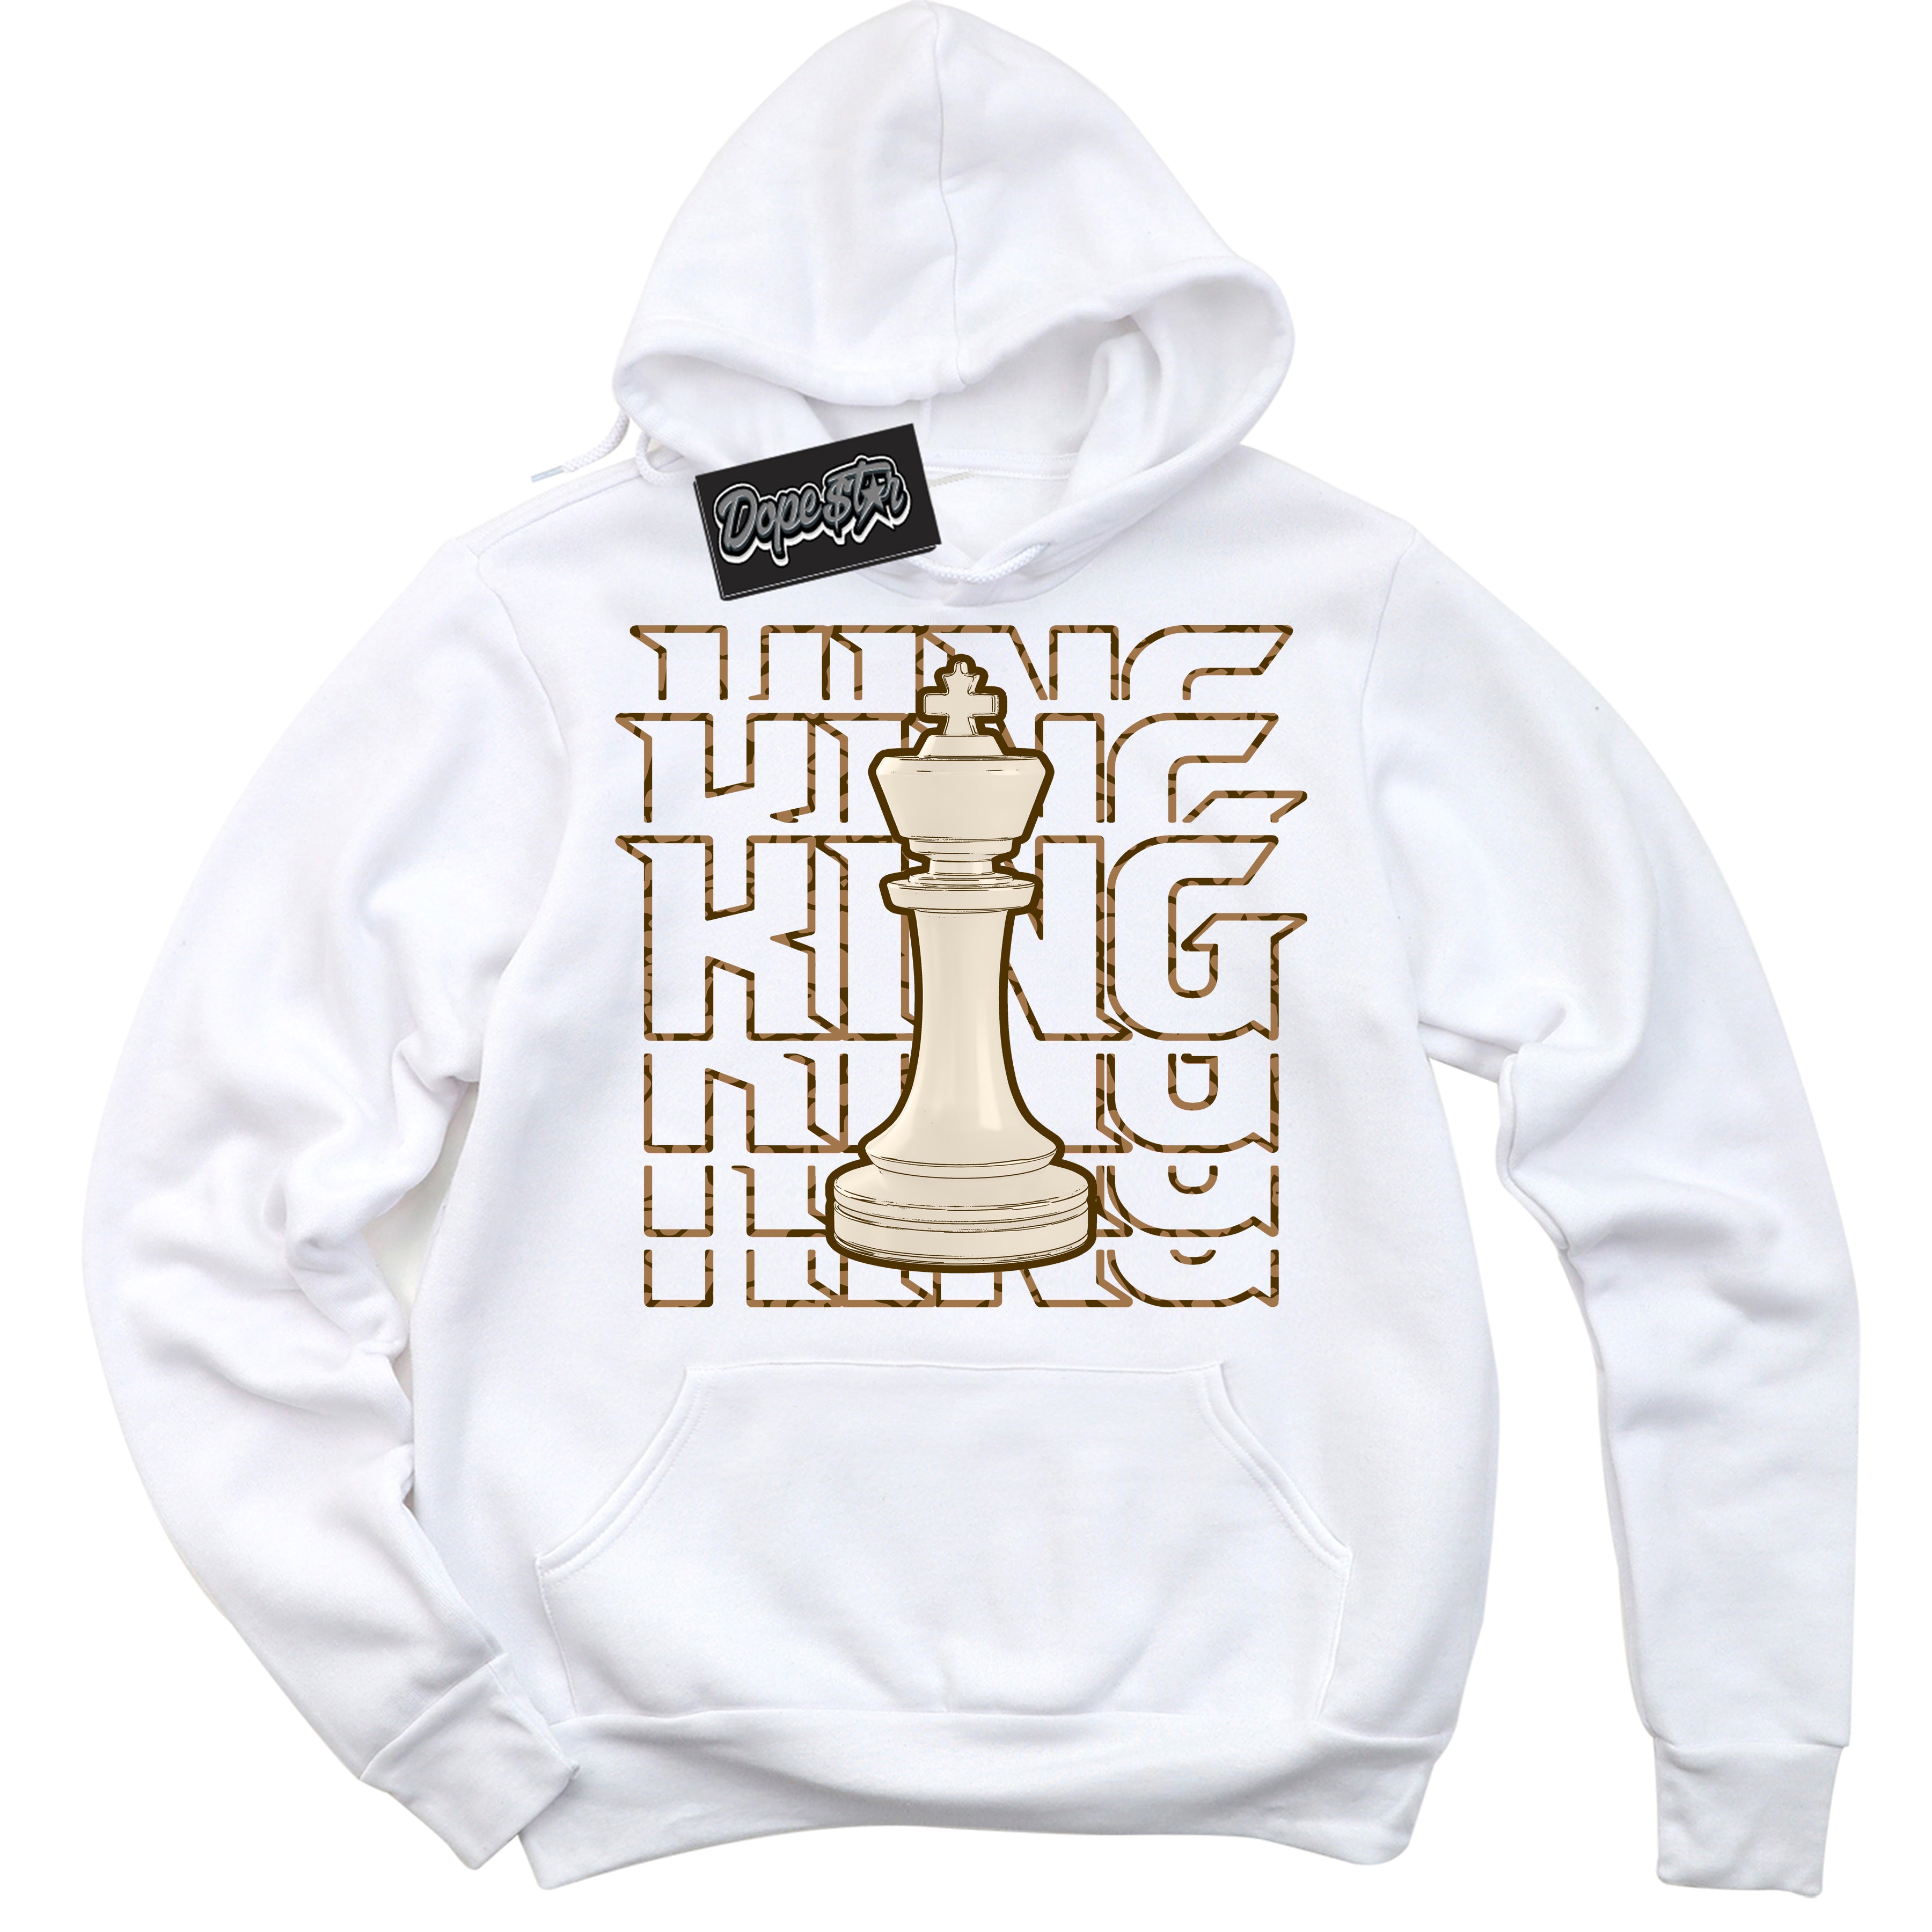 Cool White Graphic DopeStar Hoodie with “ King Chess “ print, that perfectly matches Palomino 3s sneakers